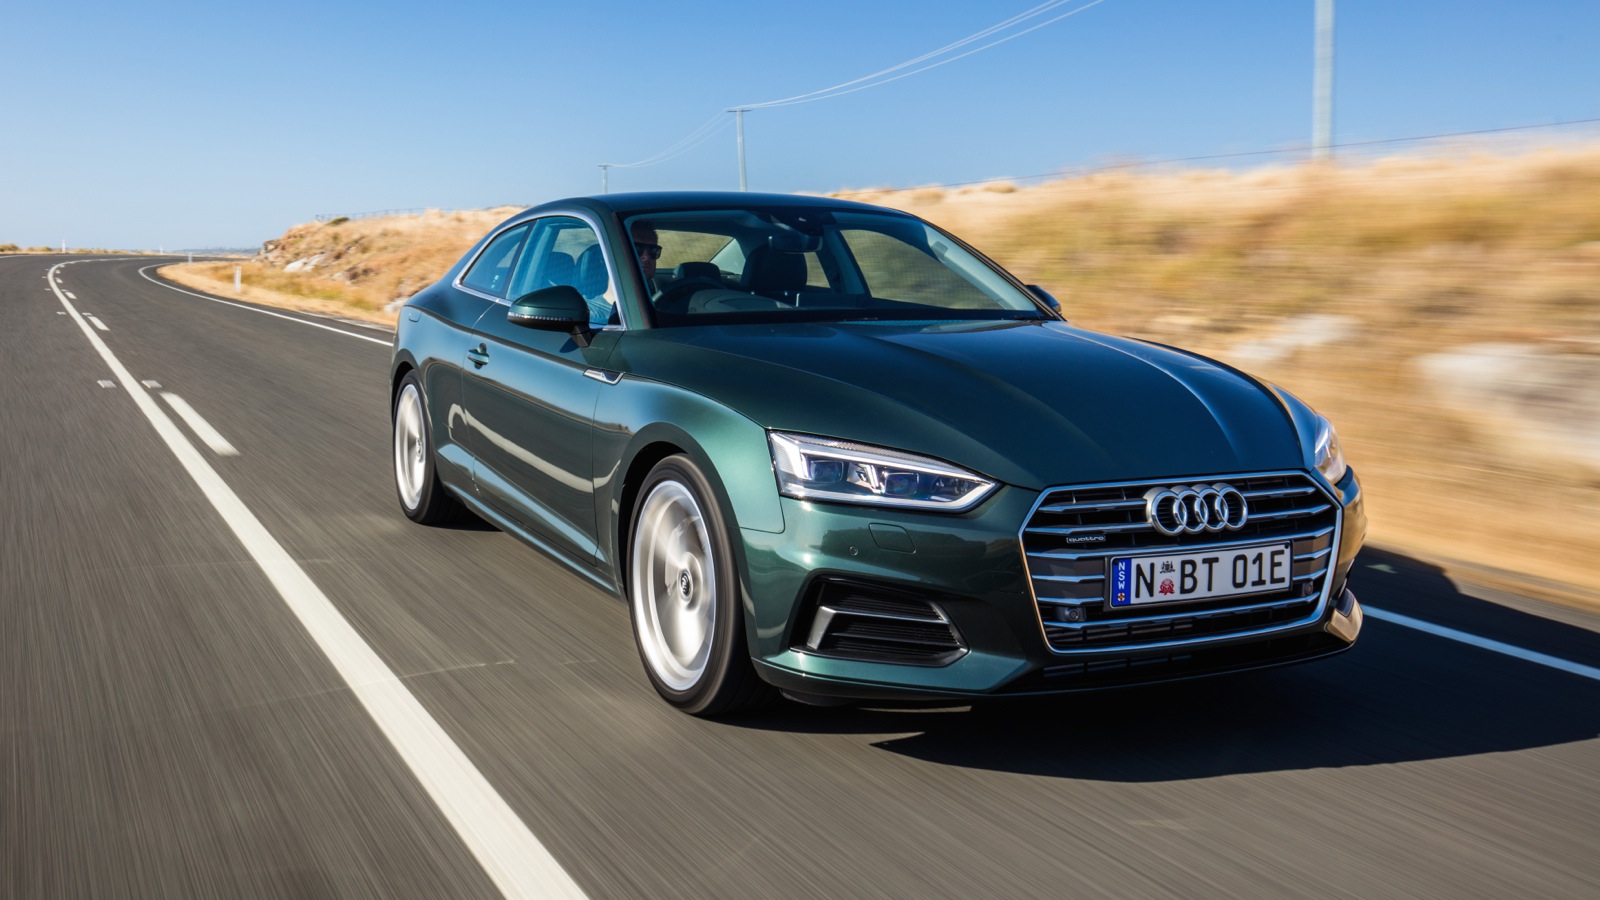 2017 Audi A5 Coupe pricing and specs - Photos (1 of 4)